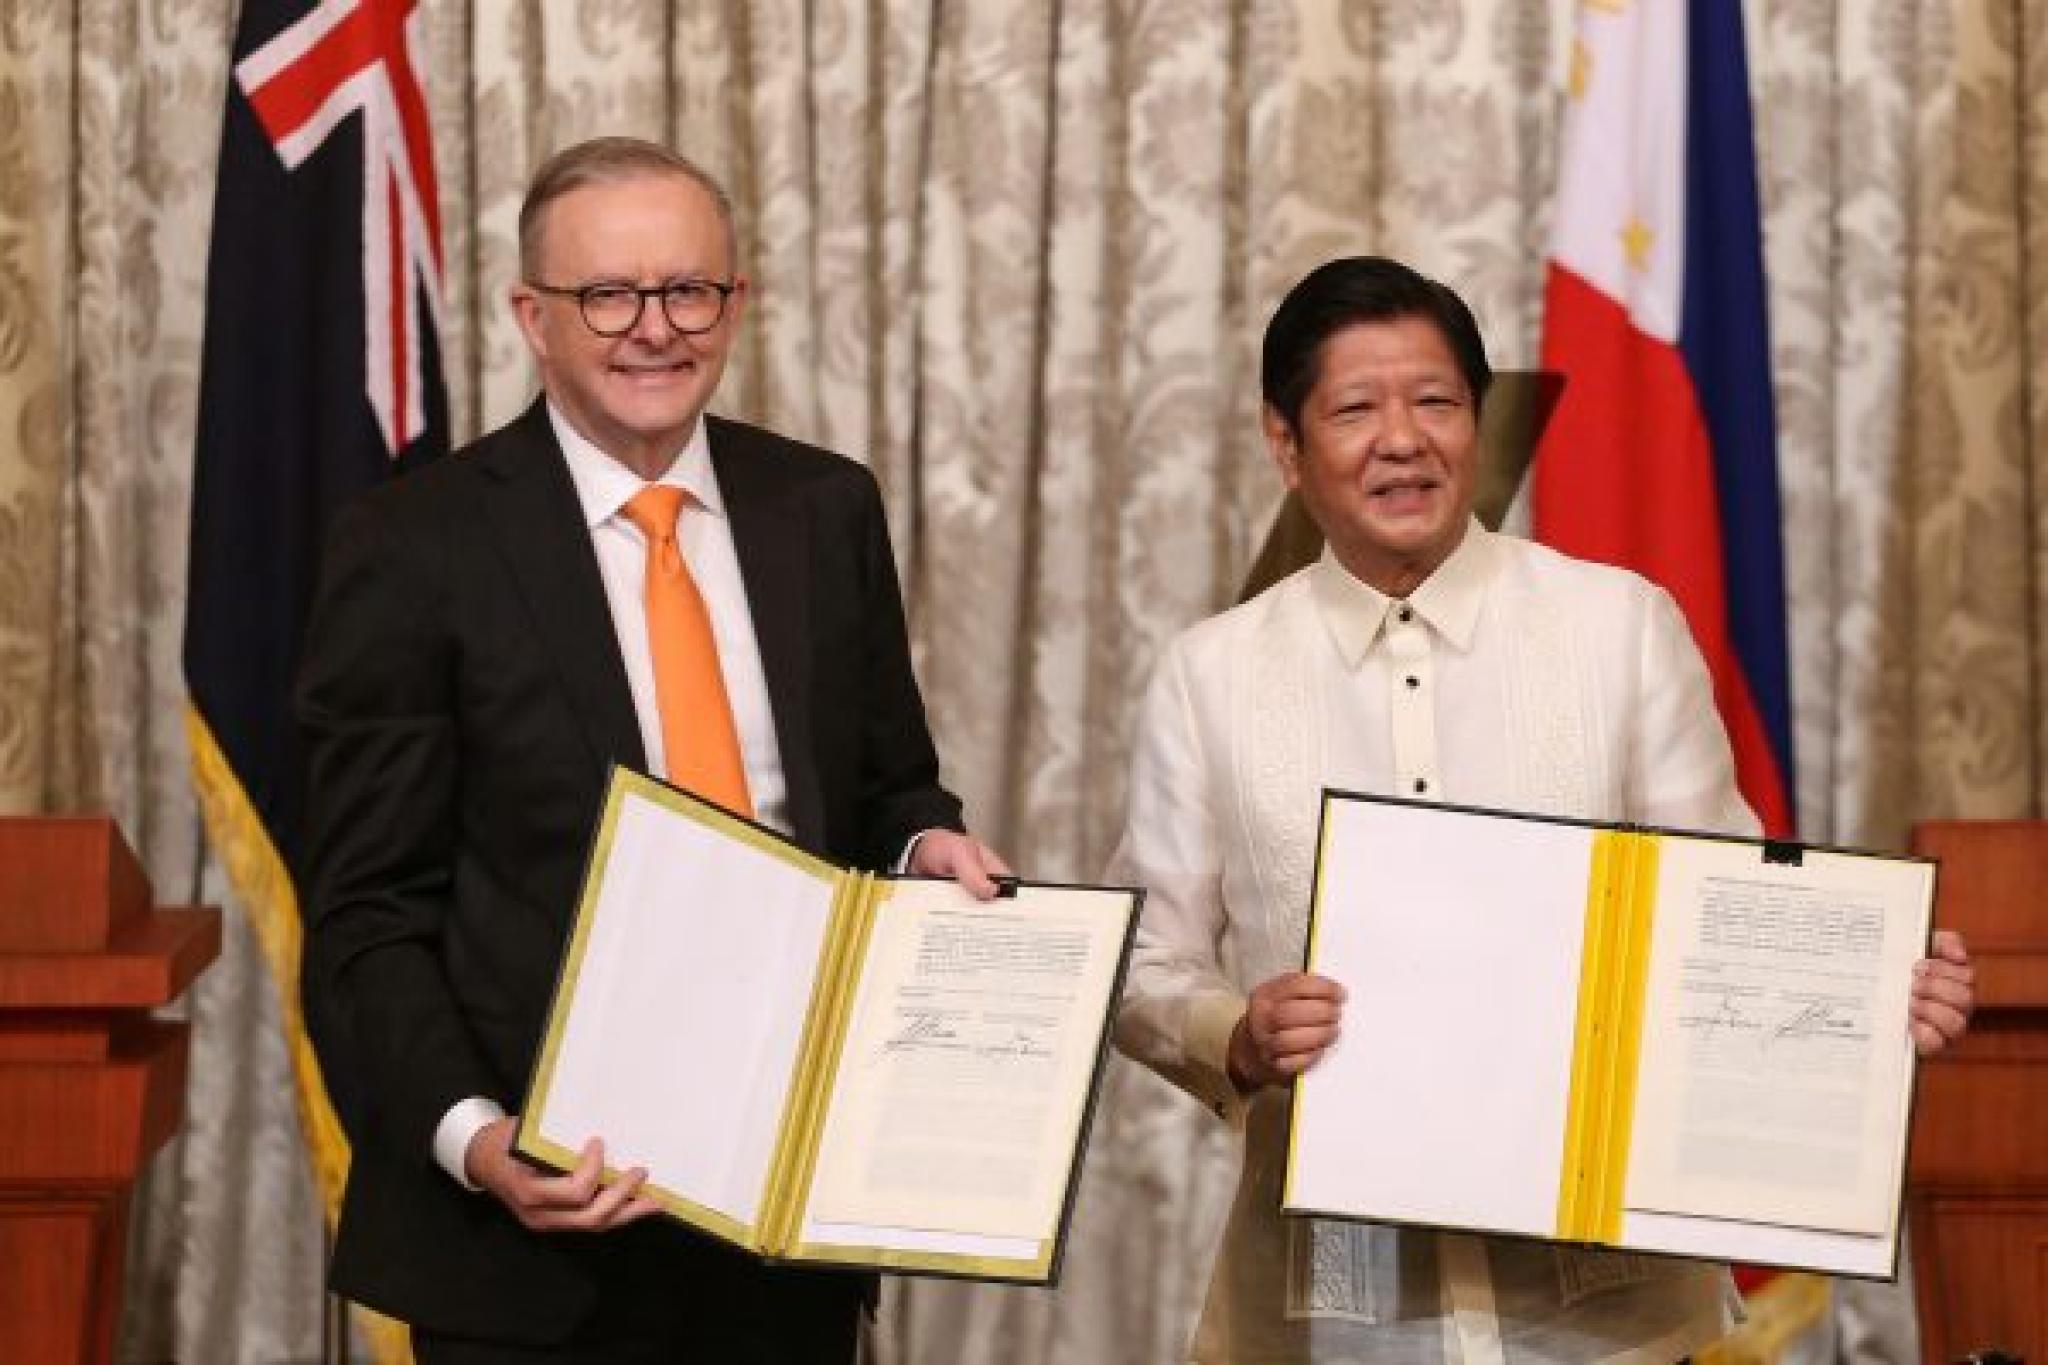 Australia's Prime Minister Anthony Albanese and Philippine President Ferdinand Marcos Jr. pose for a photo after signing the Memorandum of Understanding during his visit at the Malacanang Presidential Palace in Manila, Philippines, 8 September 2023. 